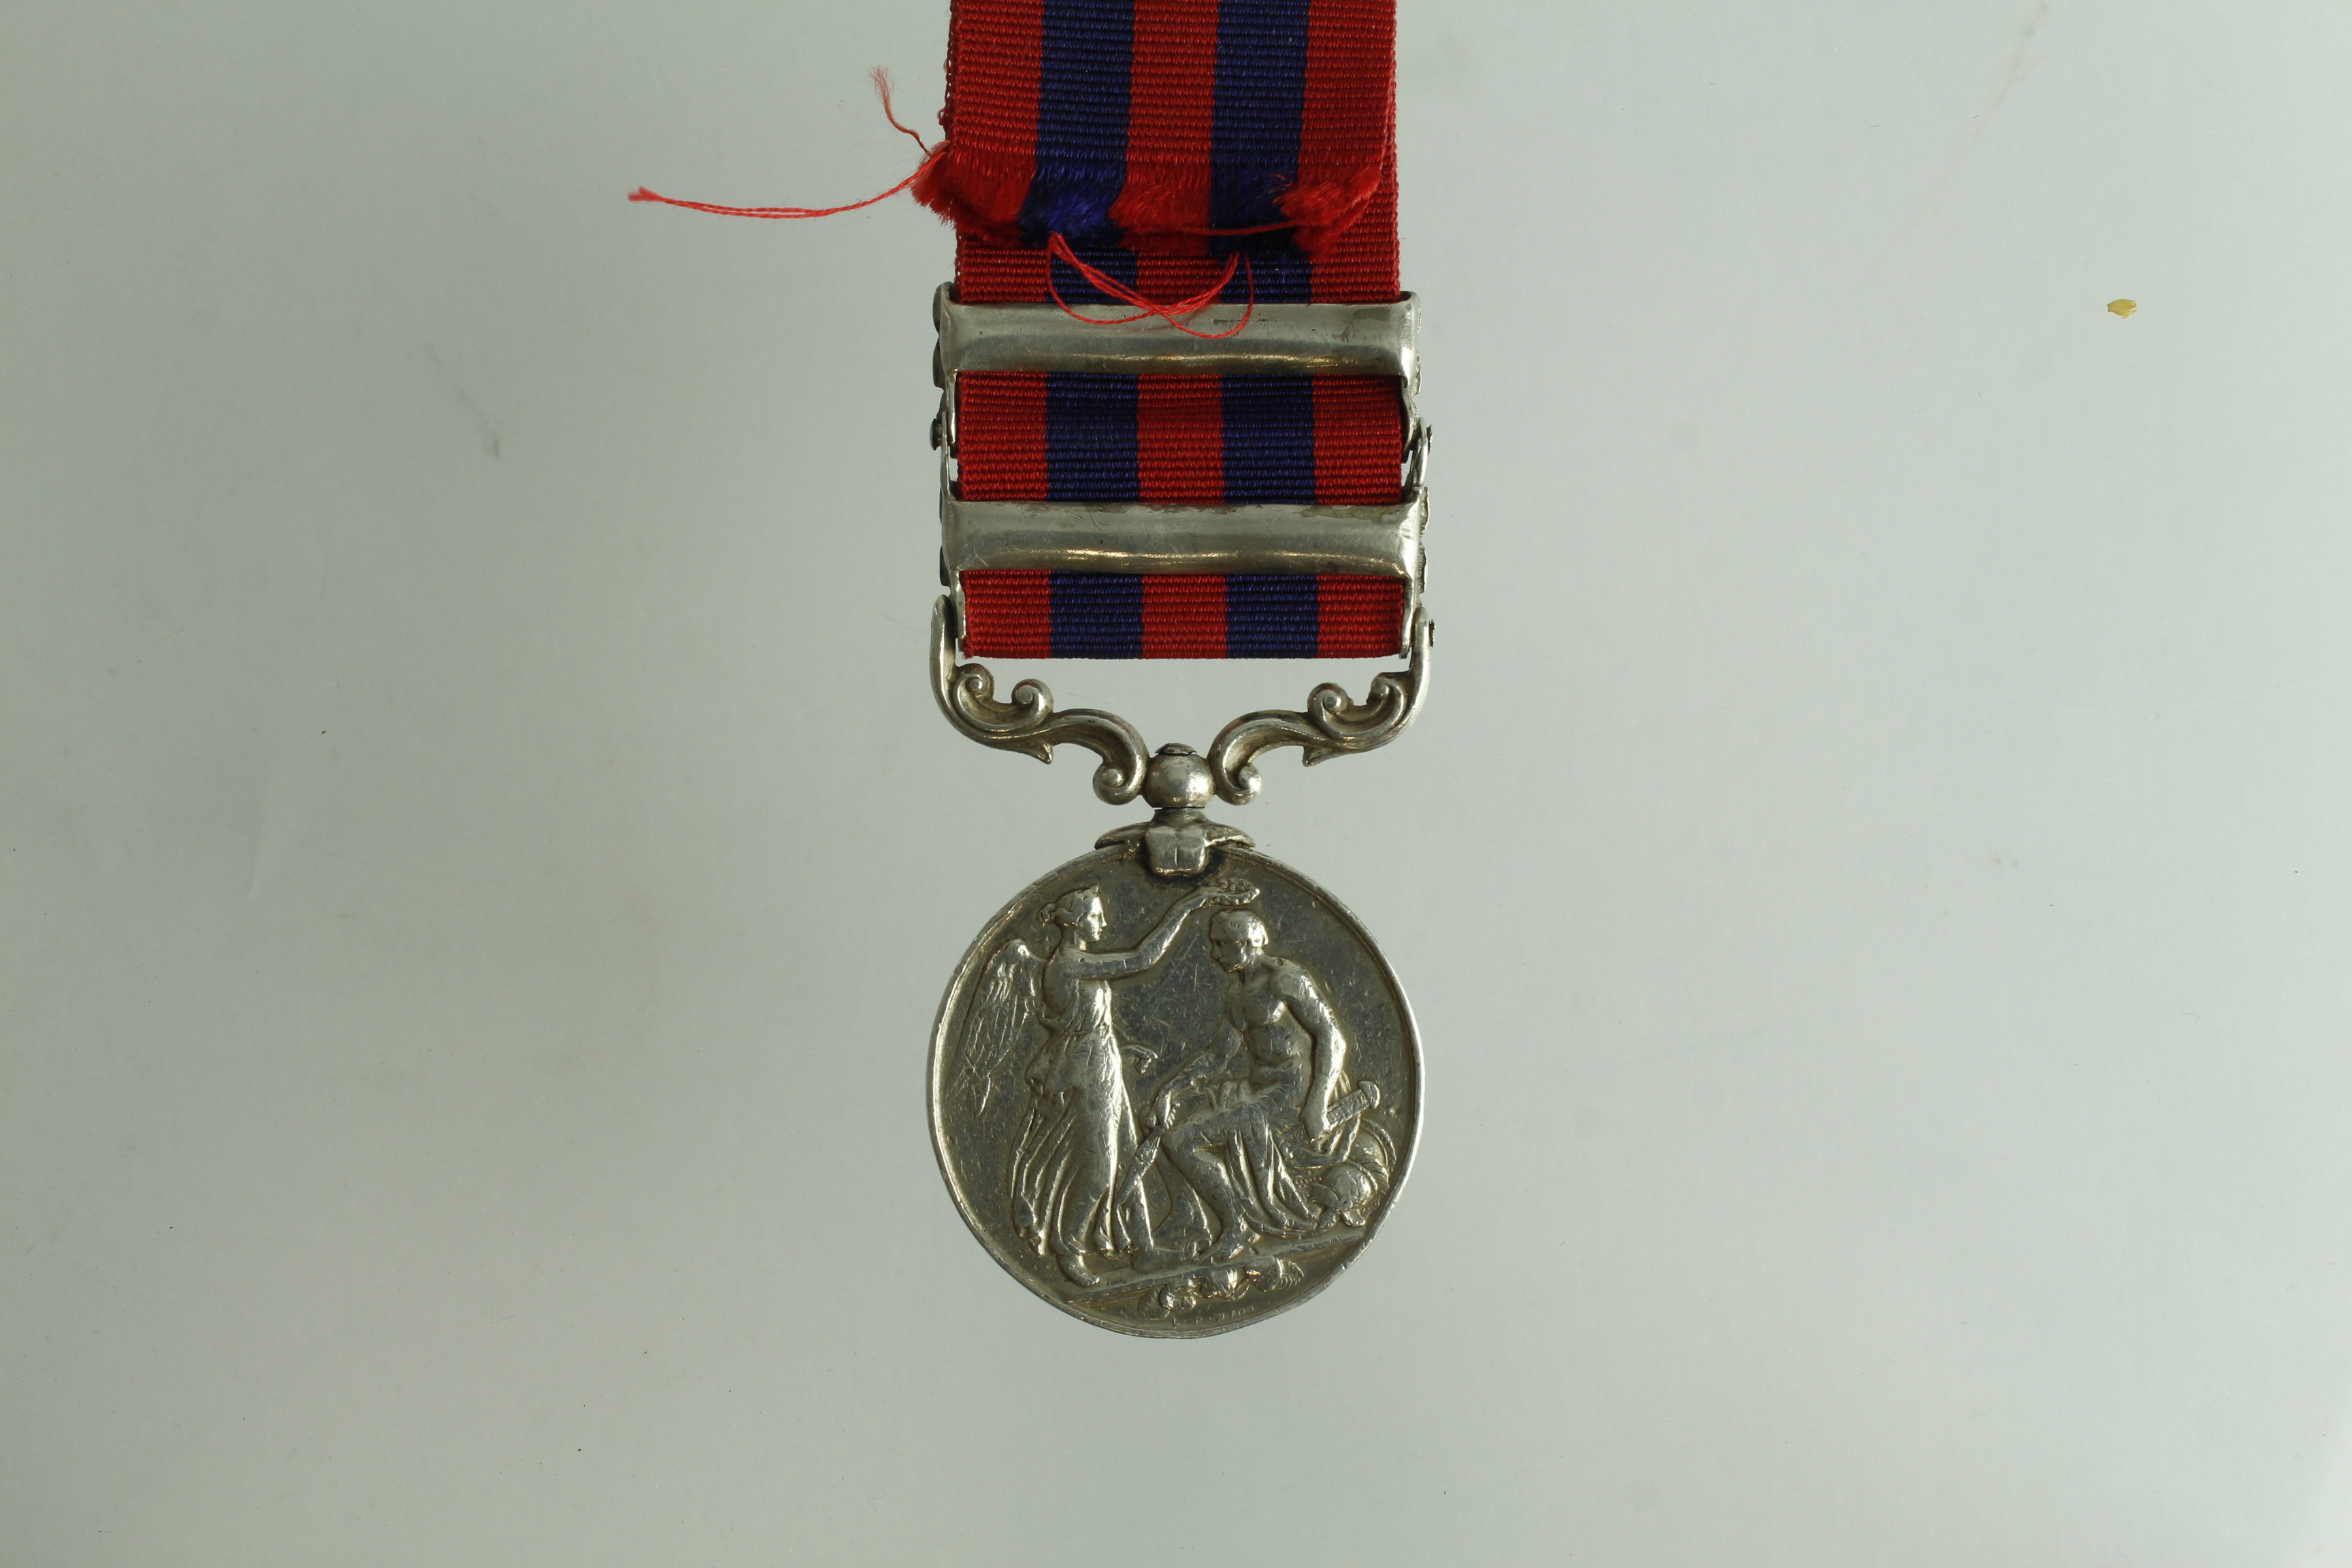 IGS 1854 with bars North West Frontier / Umbeyla, naming worn, medal worn overall and re clasped. - Image 2 of 2